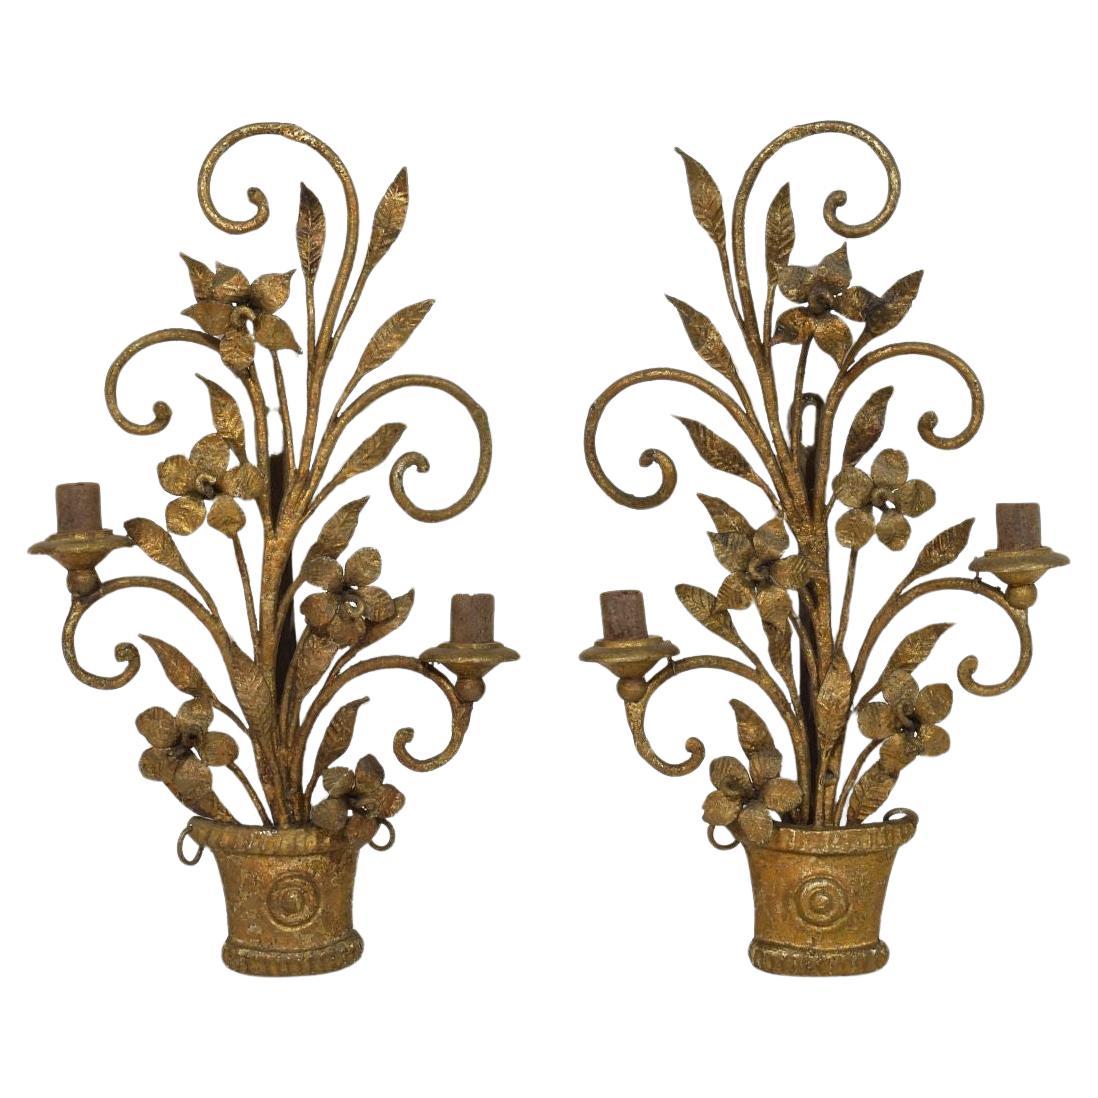 Pair Early 20th century French Hand Forged Iron Wall Candleholders / Sconces